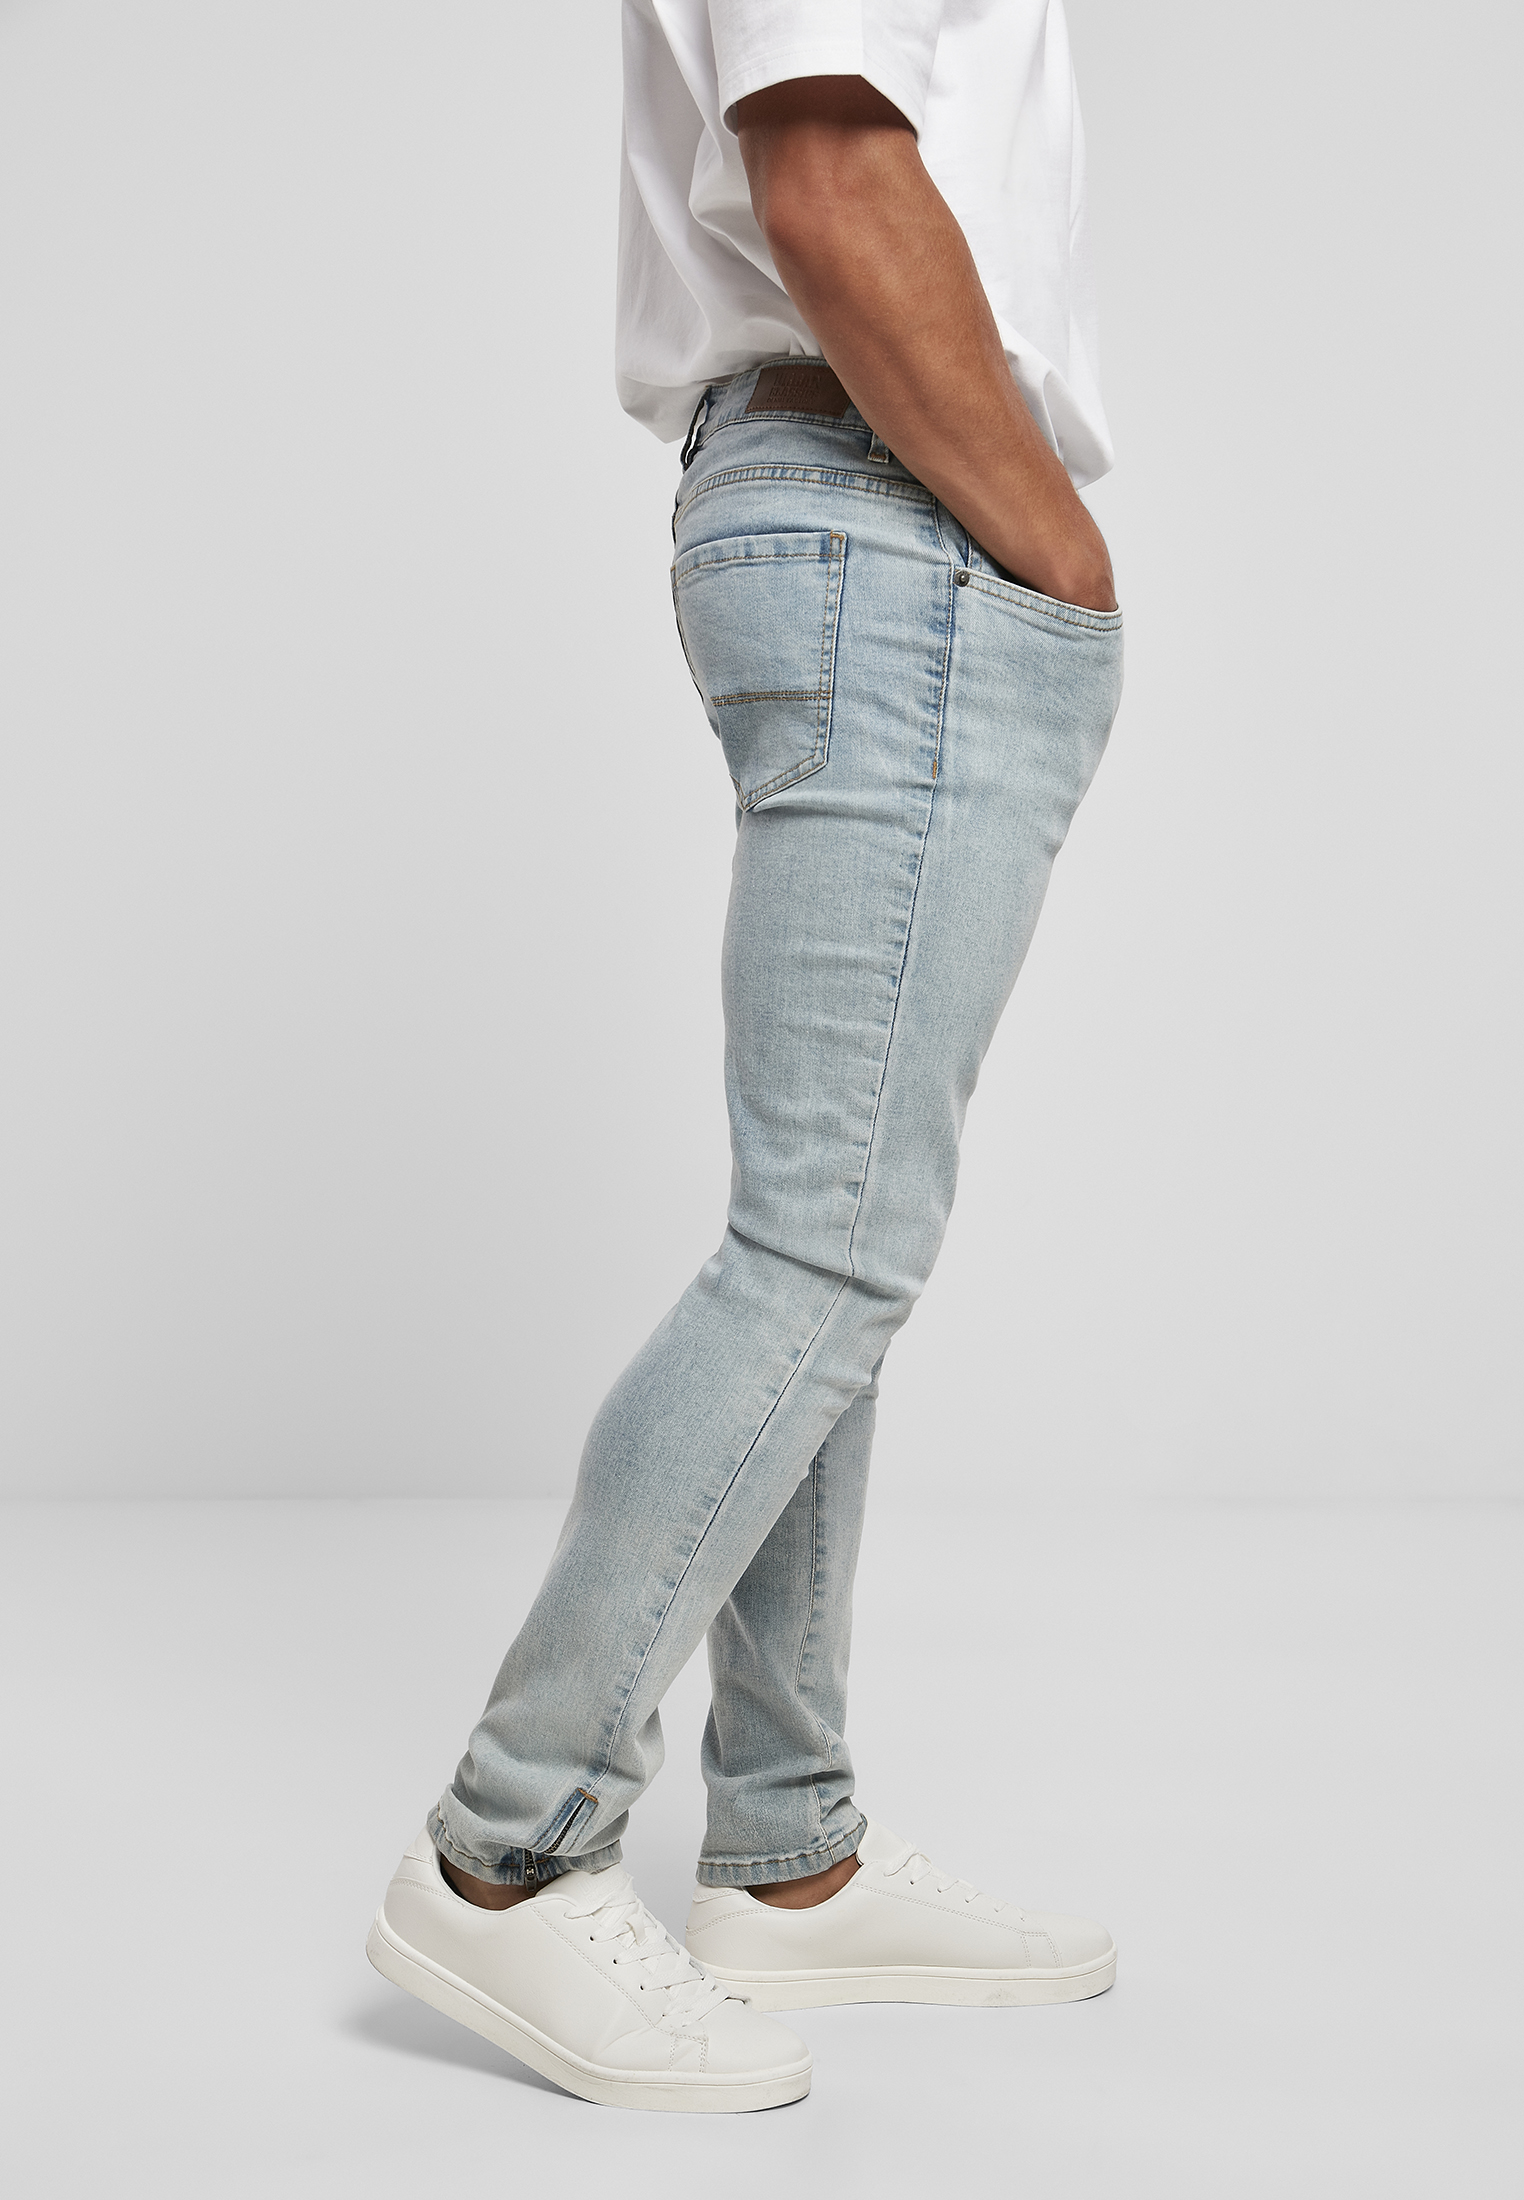 Hosen Slim Fit Zip Jeans in Farbe lighter washed